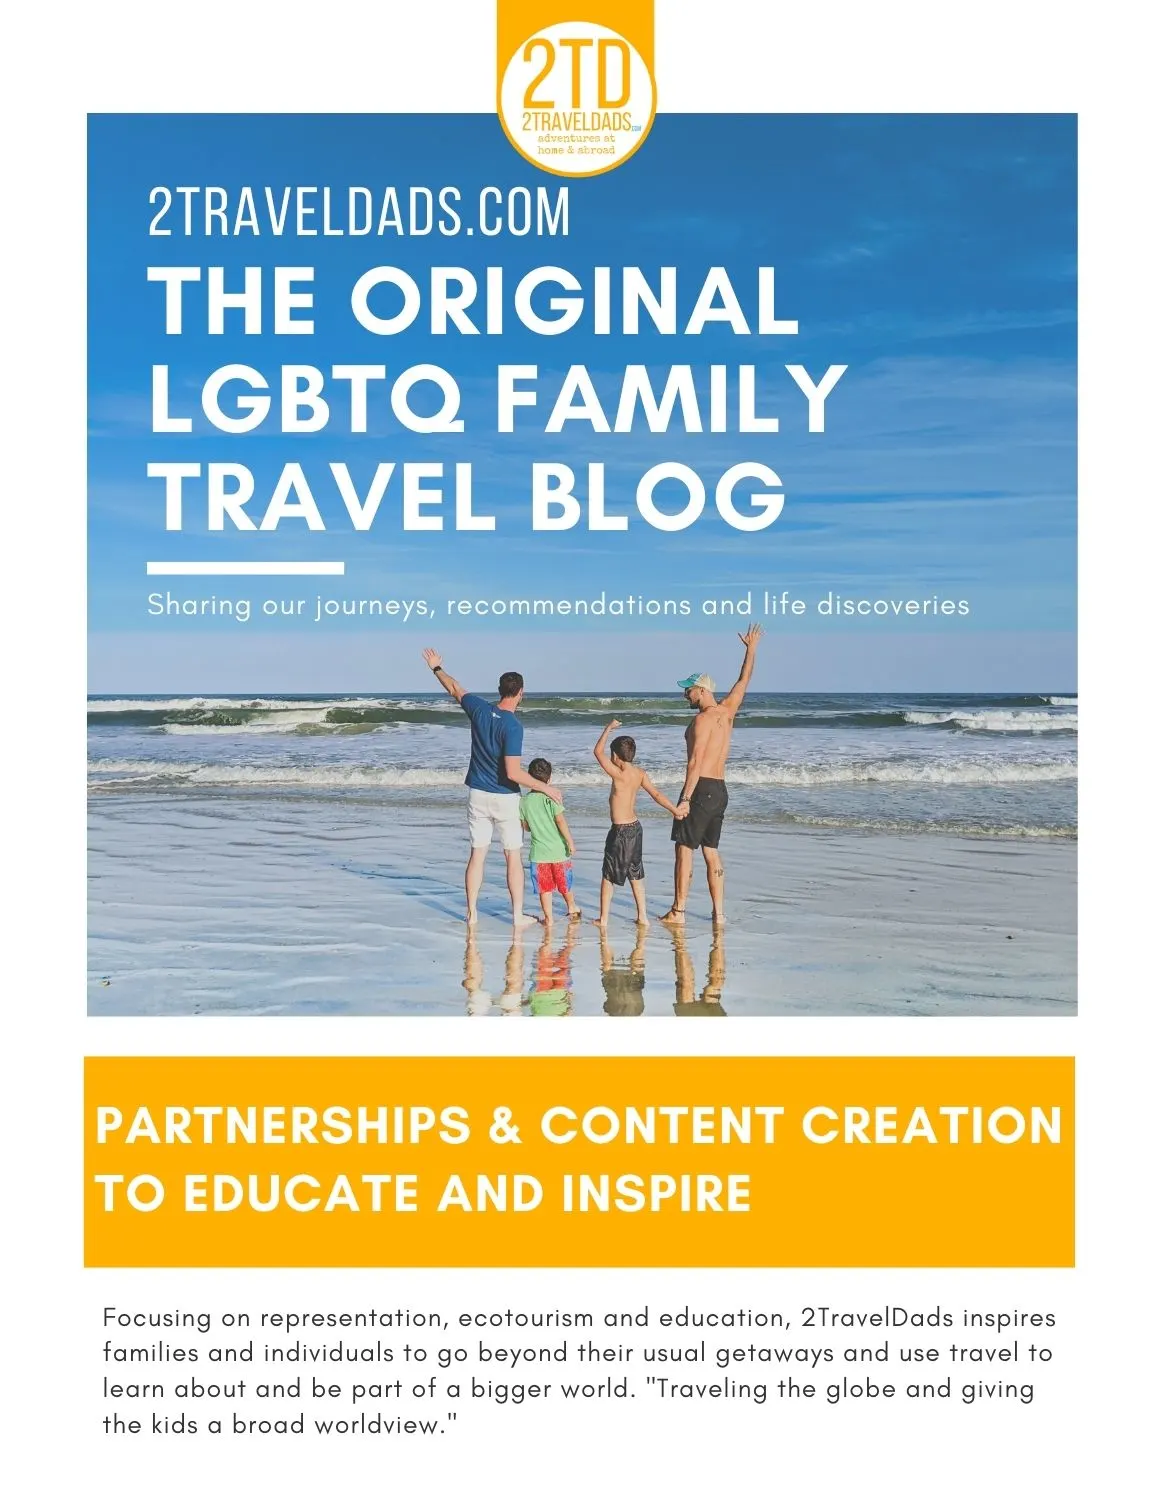 2TravelDads Media Kit - stories and coverage opportunities for the Original LGBTQ Family Travel Blog and podcast.